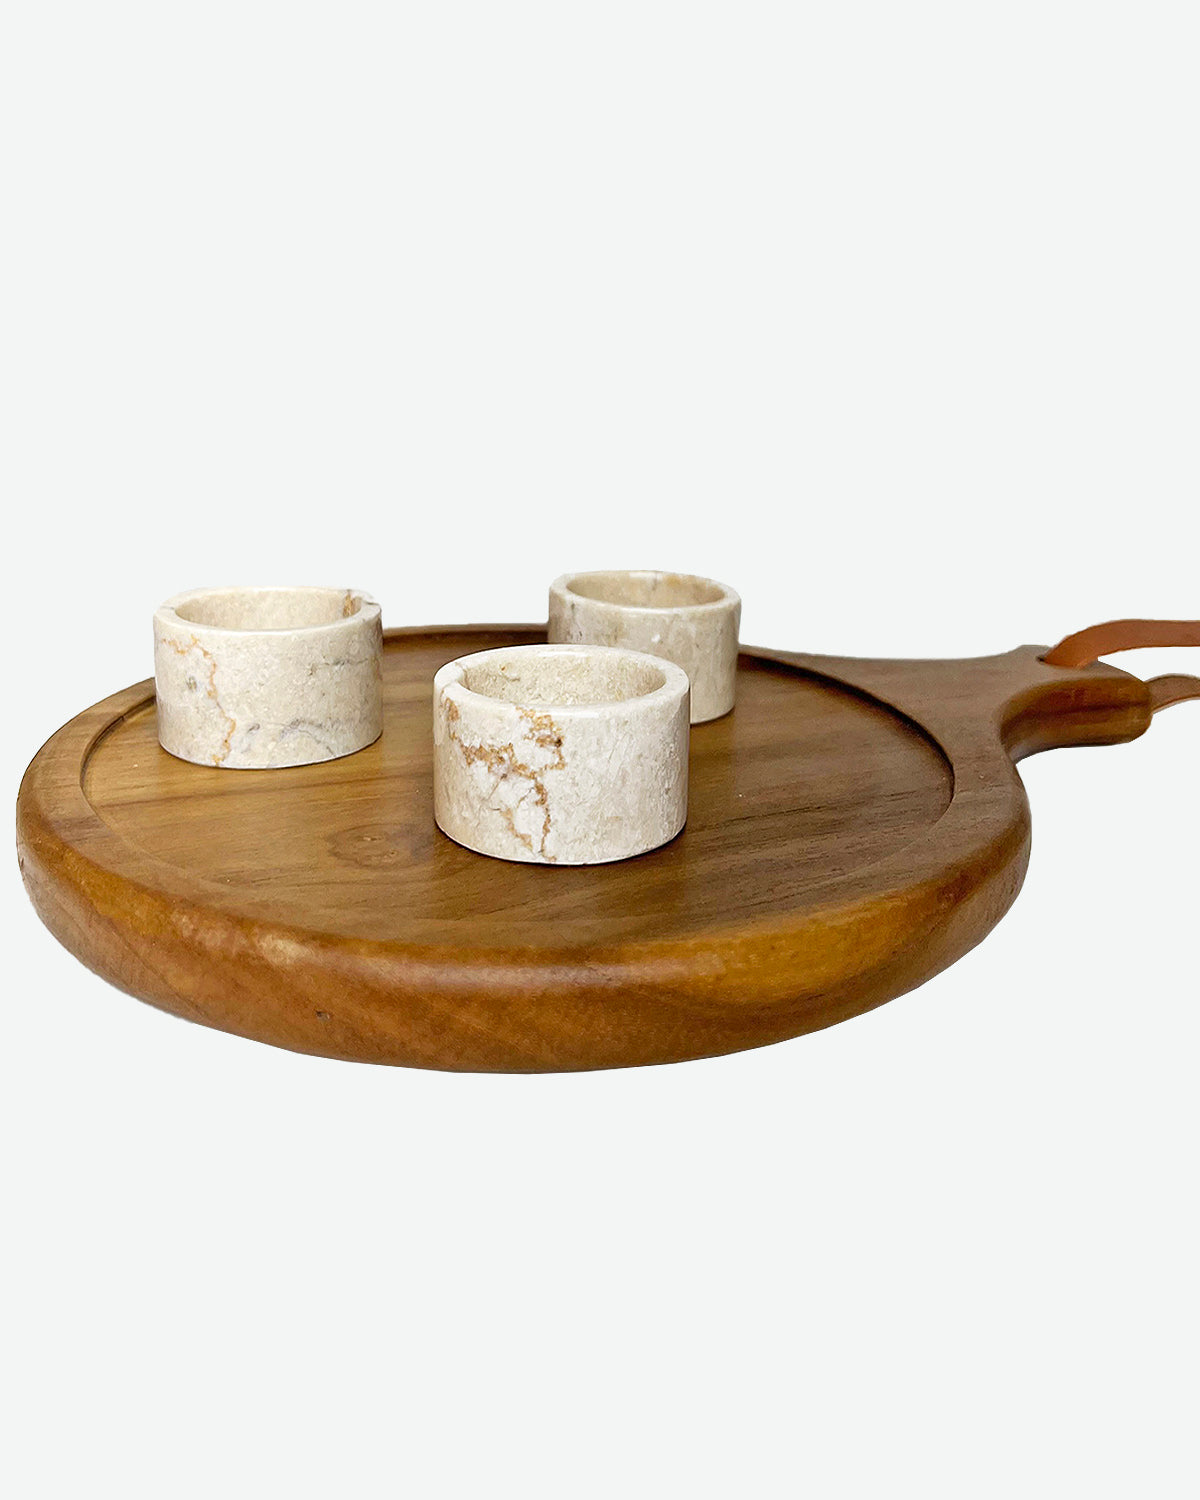 Manat table with sauce boats